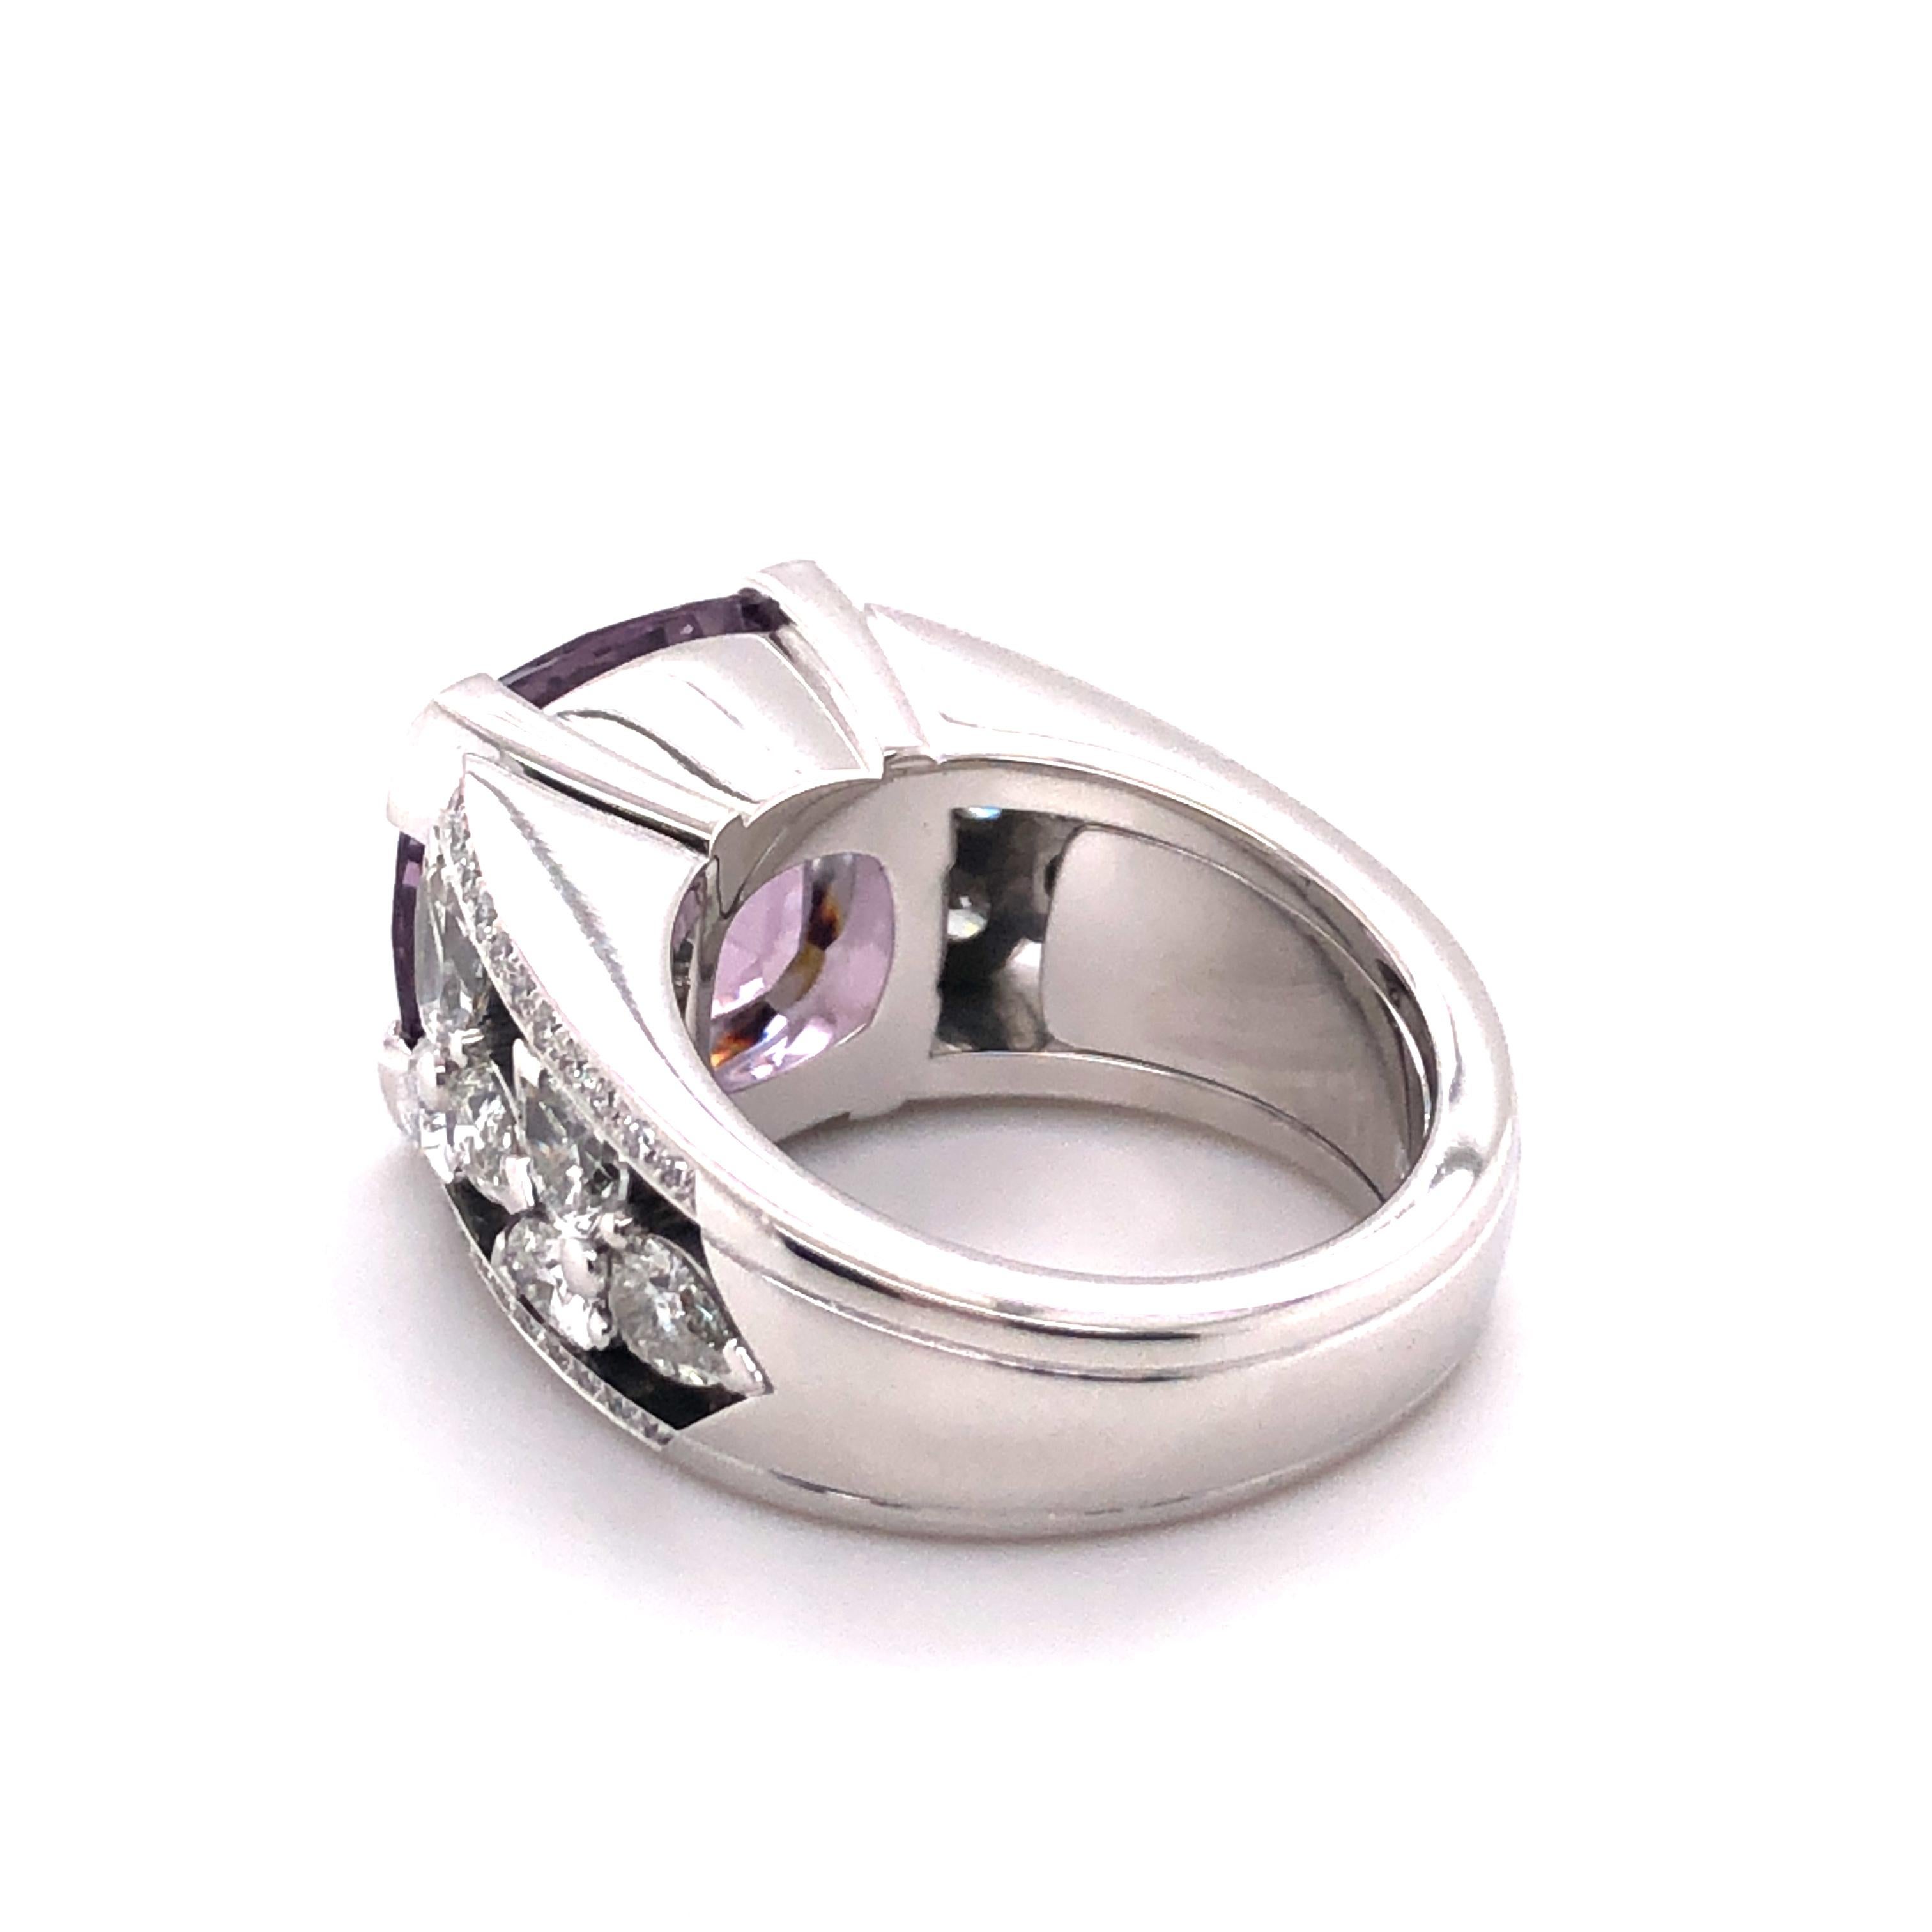 Women's or Men's Certified 8.90 Ct Violet Burmese Spinel and Diamond Ring in 18 Karat White Gold For Sale